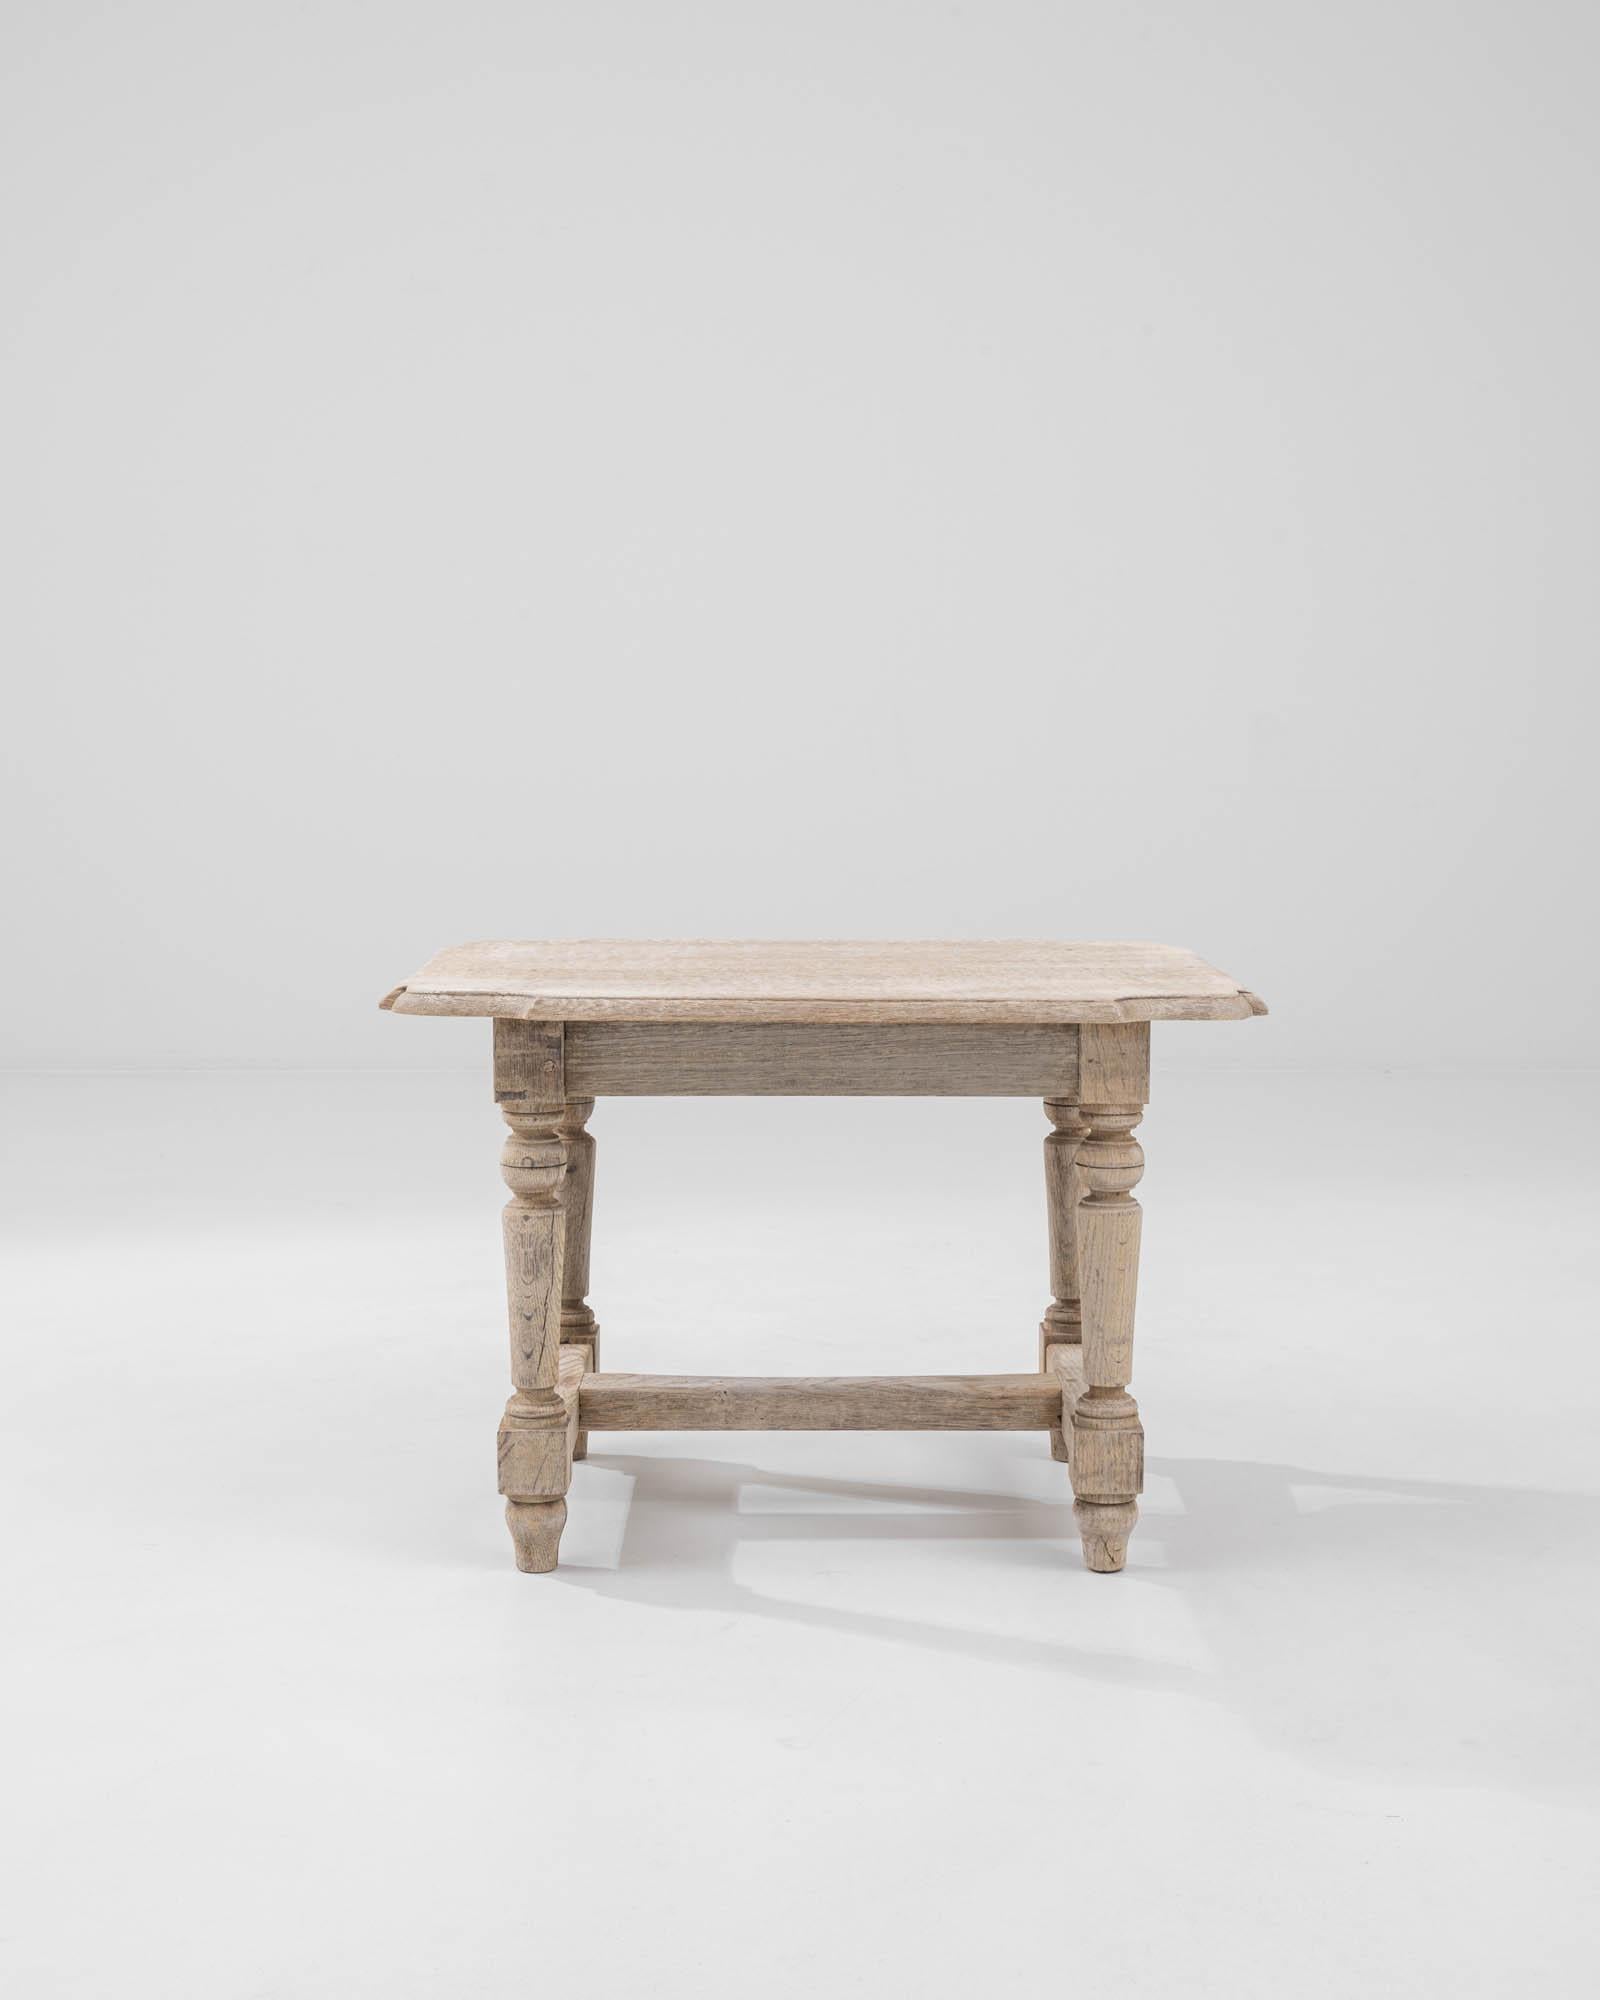 A wooden coffee table created in 1900s France. With elegantly joined stretchers, a tastefully sculpted top, and expertly lathed legs, this sturdy coffee table imparts a classic sense of farmhouse charm. The oak has been delicately treated with a